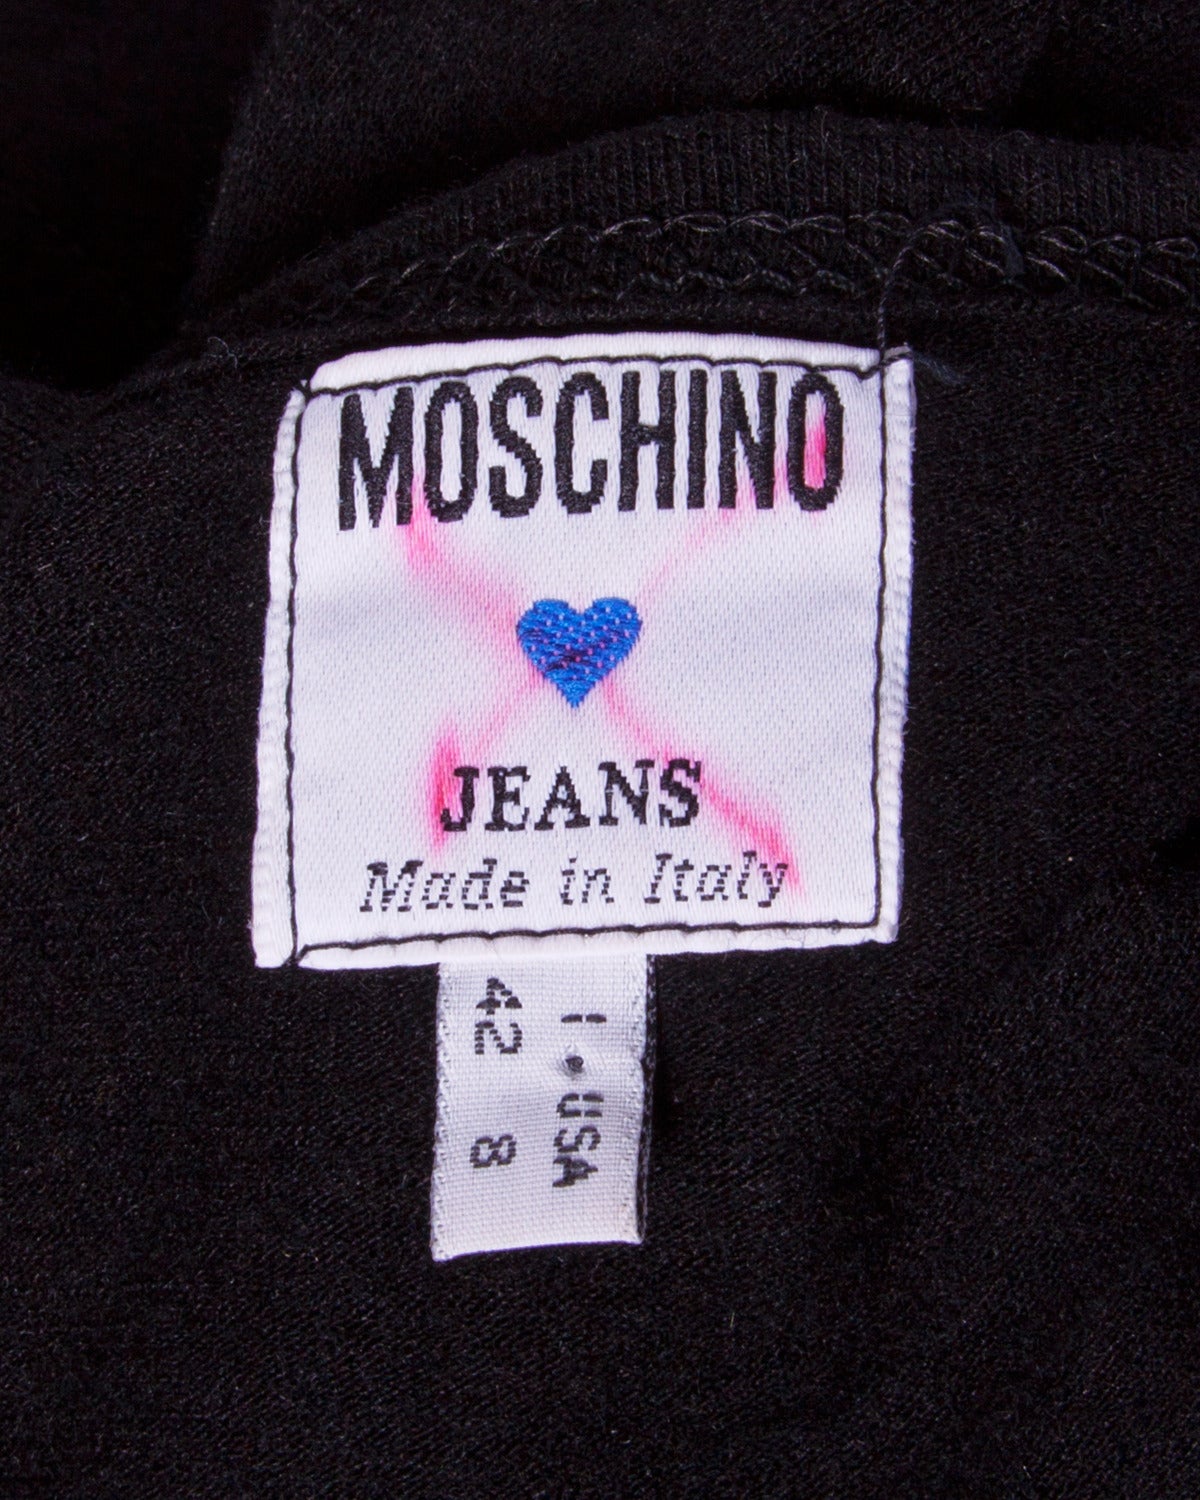 Vintage Moschino Jeans jersey knit shirt dress with a 